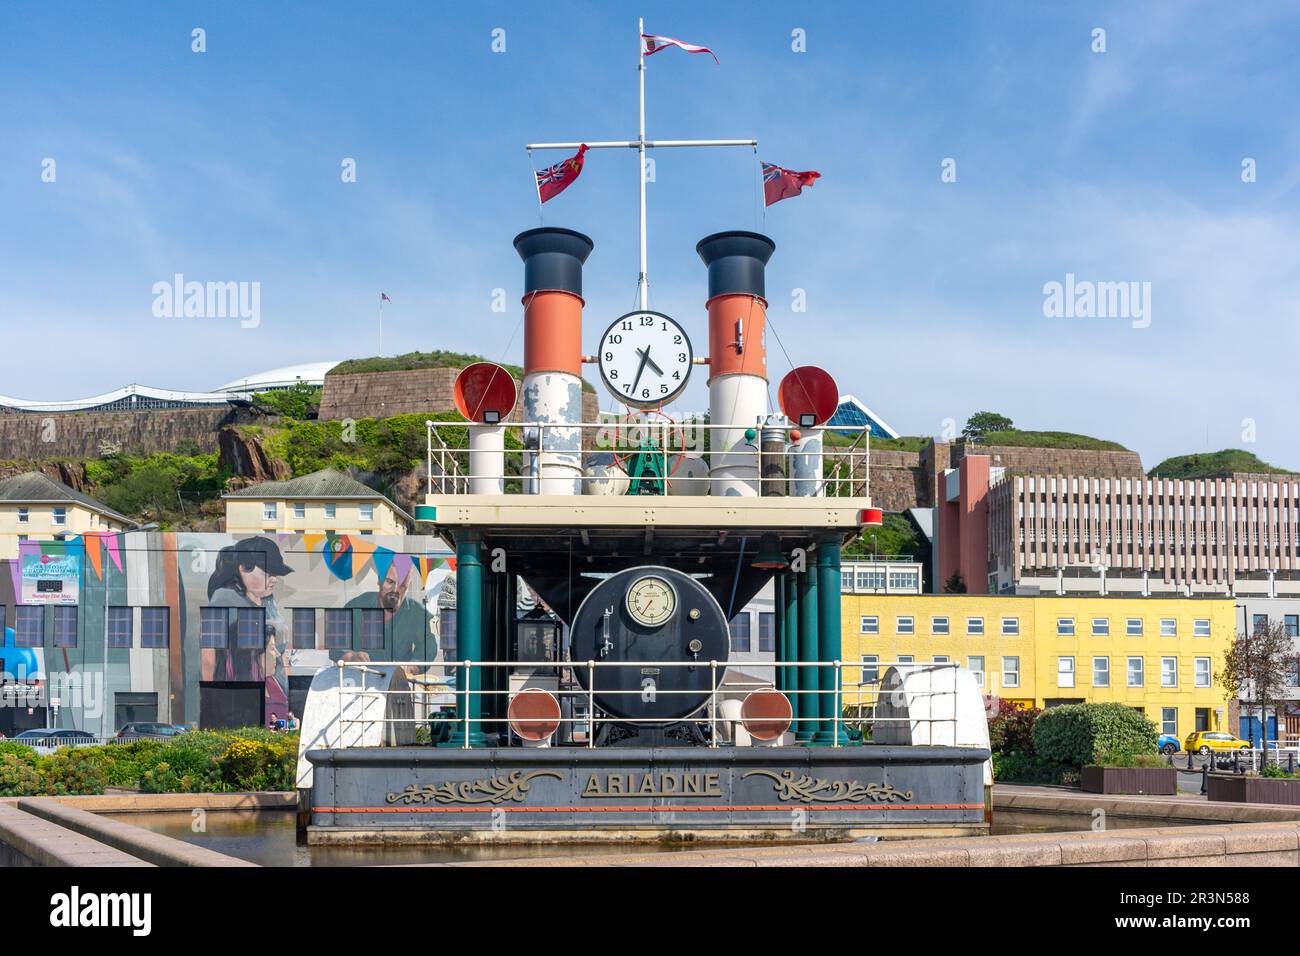 Fontana dell'orologio a vapore, Old Harbour, St Helier, Jersey, Isole del canale Foto Stock